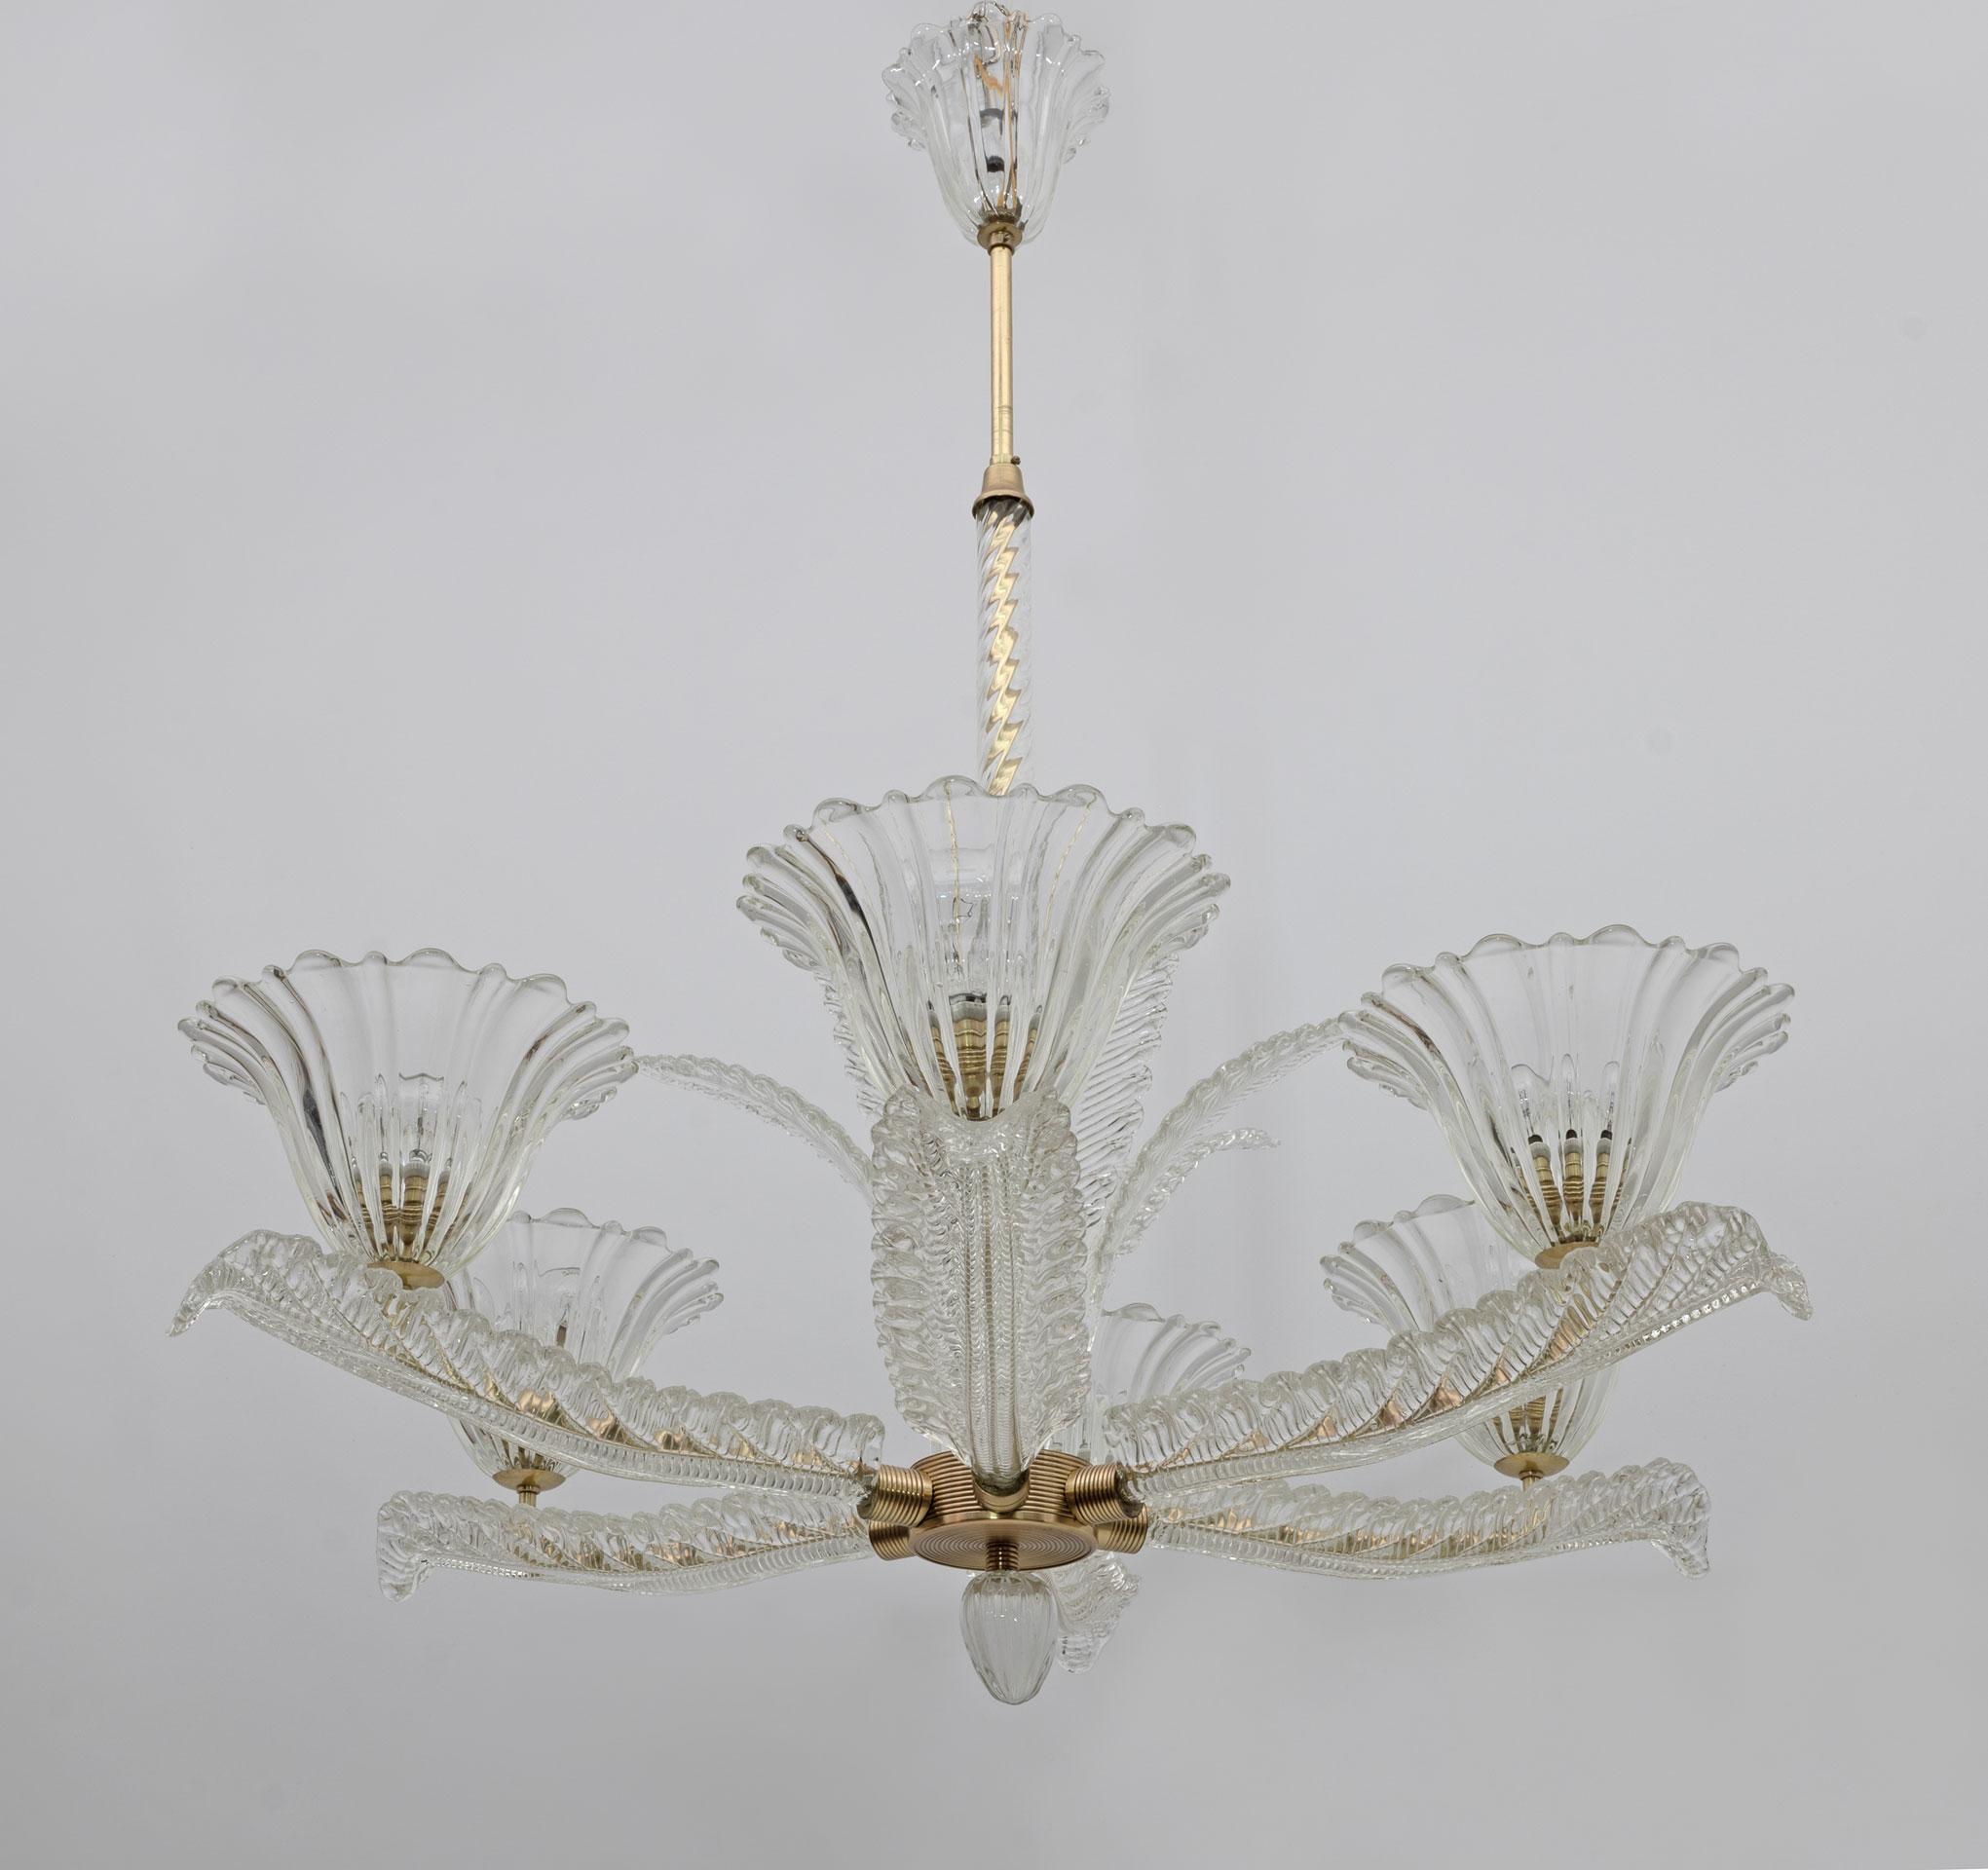 Glass chandelier with six arms in the shape of a tulip and leaf decorations in transparent glass and brass. Designed by Ercole Barovier and produced by Vetreria Artistica Barovier & C in the late 1930s in Italy, this chandelier exudes the spirit and